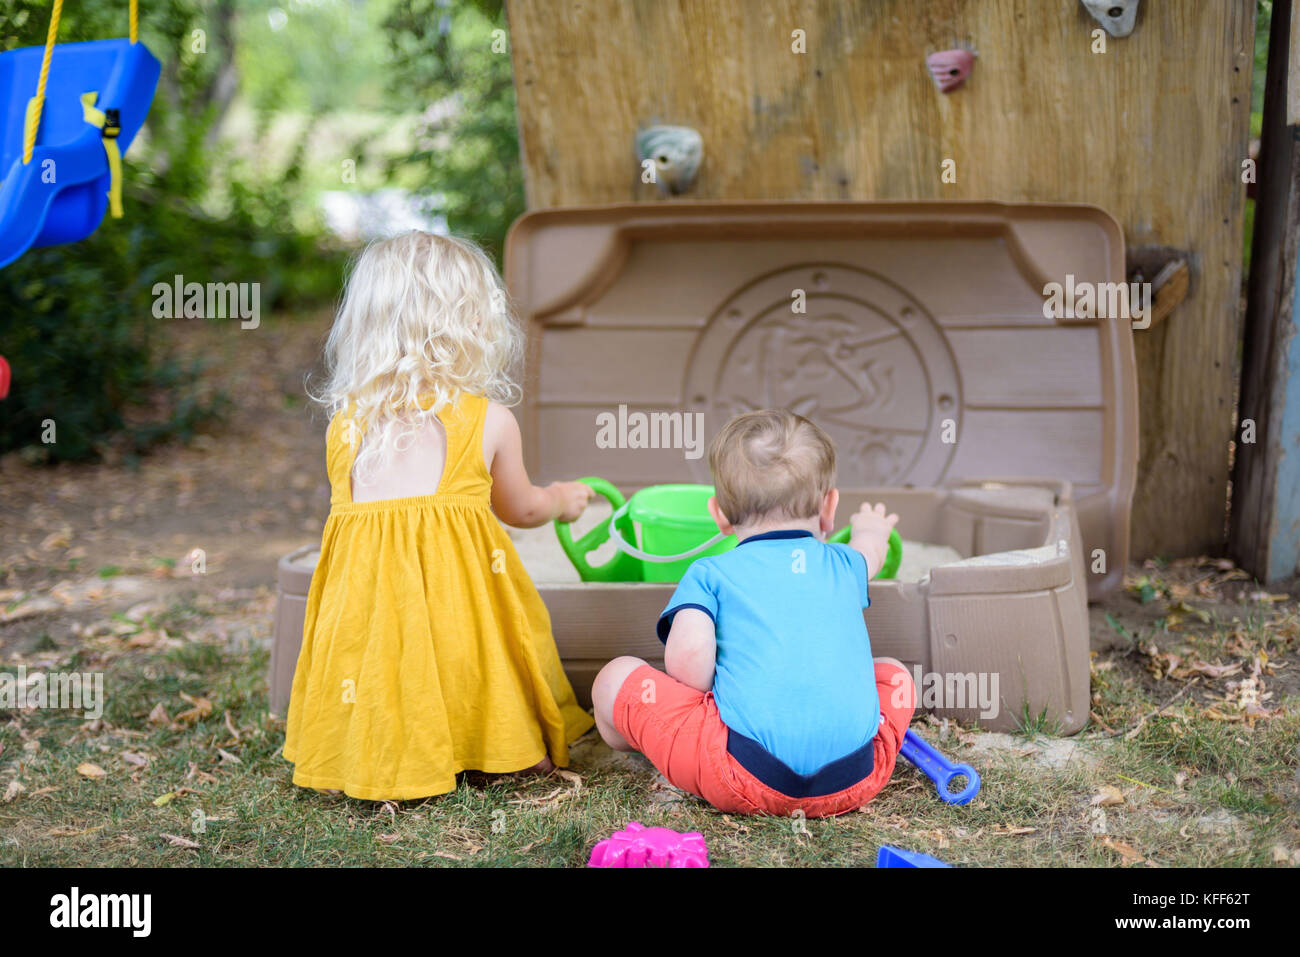 two small children playing in backyard sandbox in summer Stock Photo